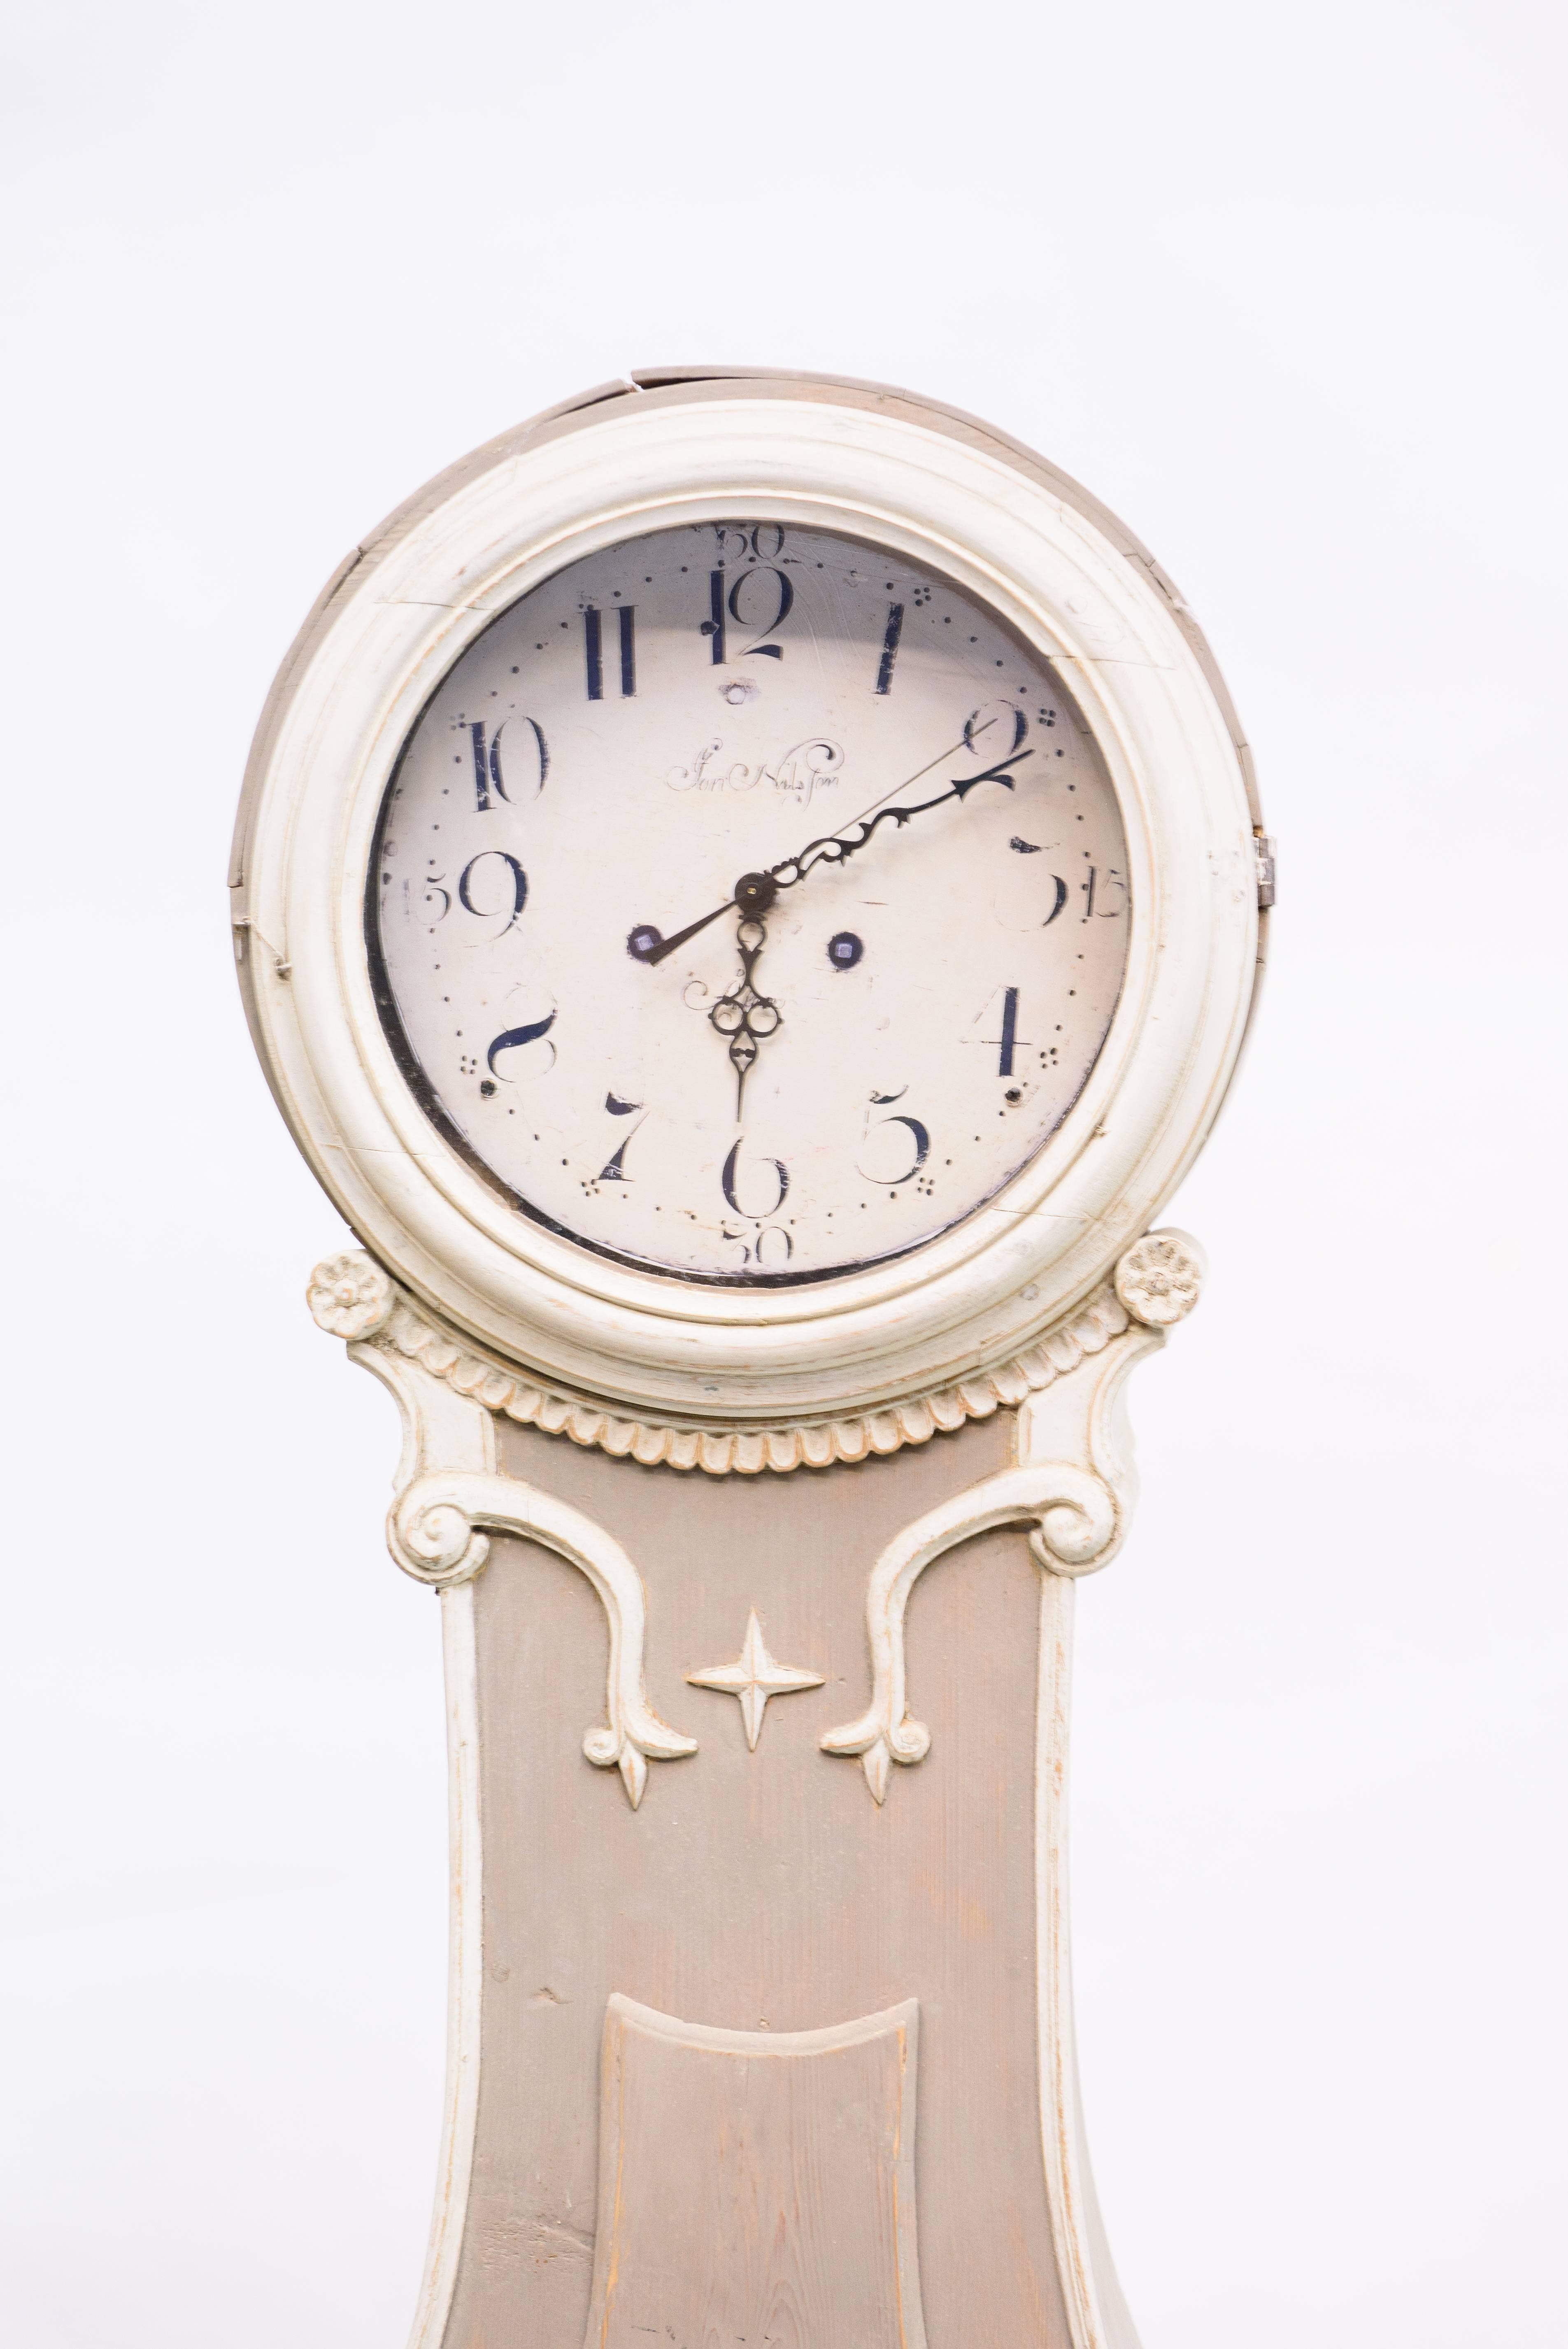 This is a restored and repainted Swedish Mora clock, actually the style of this case is called 